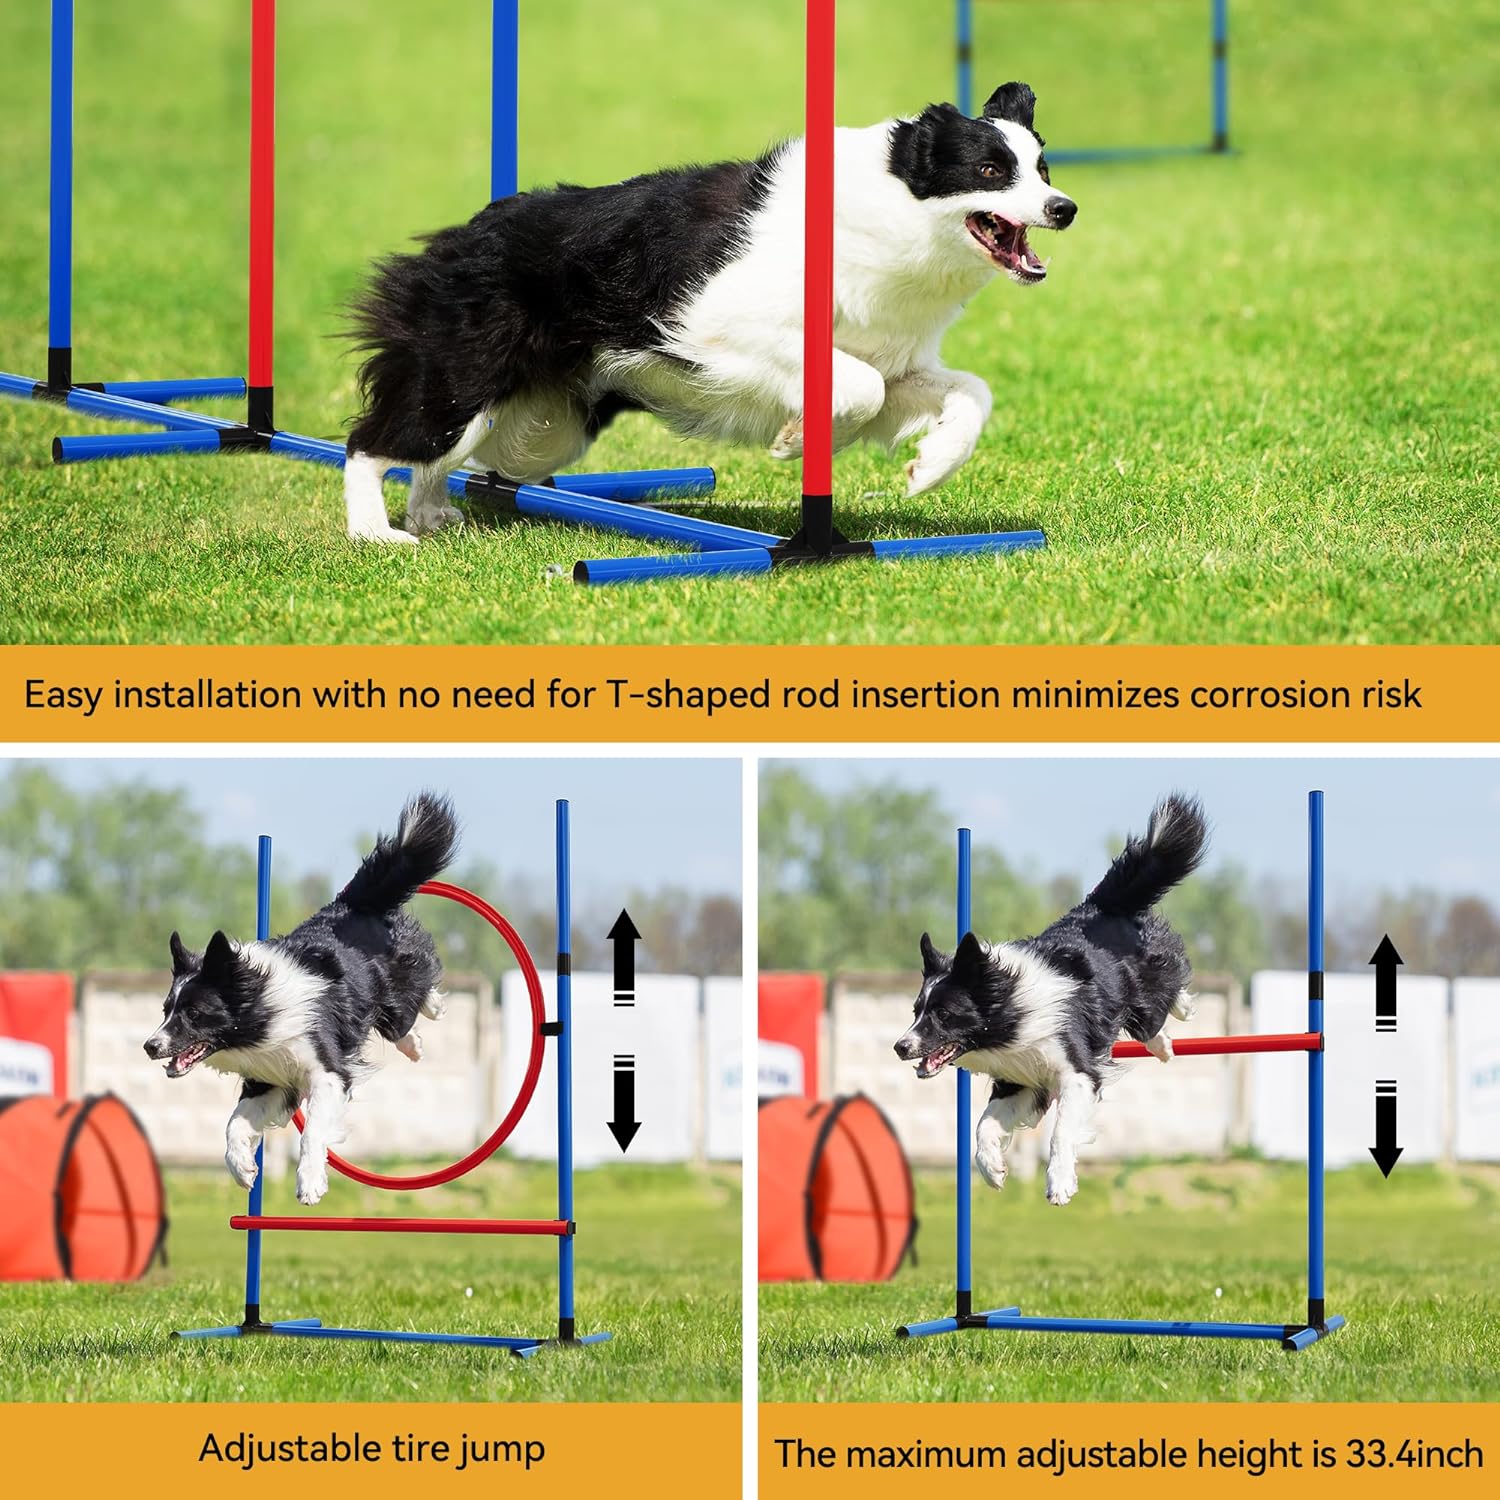 YITAHOME Dog Agility Equipments, Includes Flirt Pole Toy, 3 Flying Discs, 1 Agility Tunnel, 2 Jumps, 6 Weave Poles, Pause Box, Agility Course Set for Backyard, Indoor, Outdoor